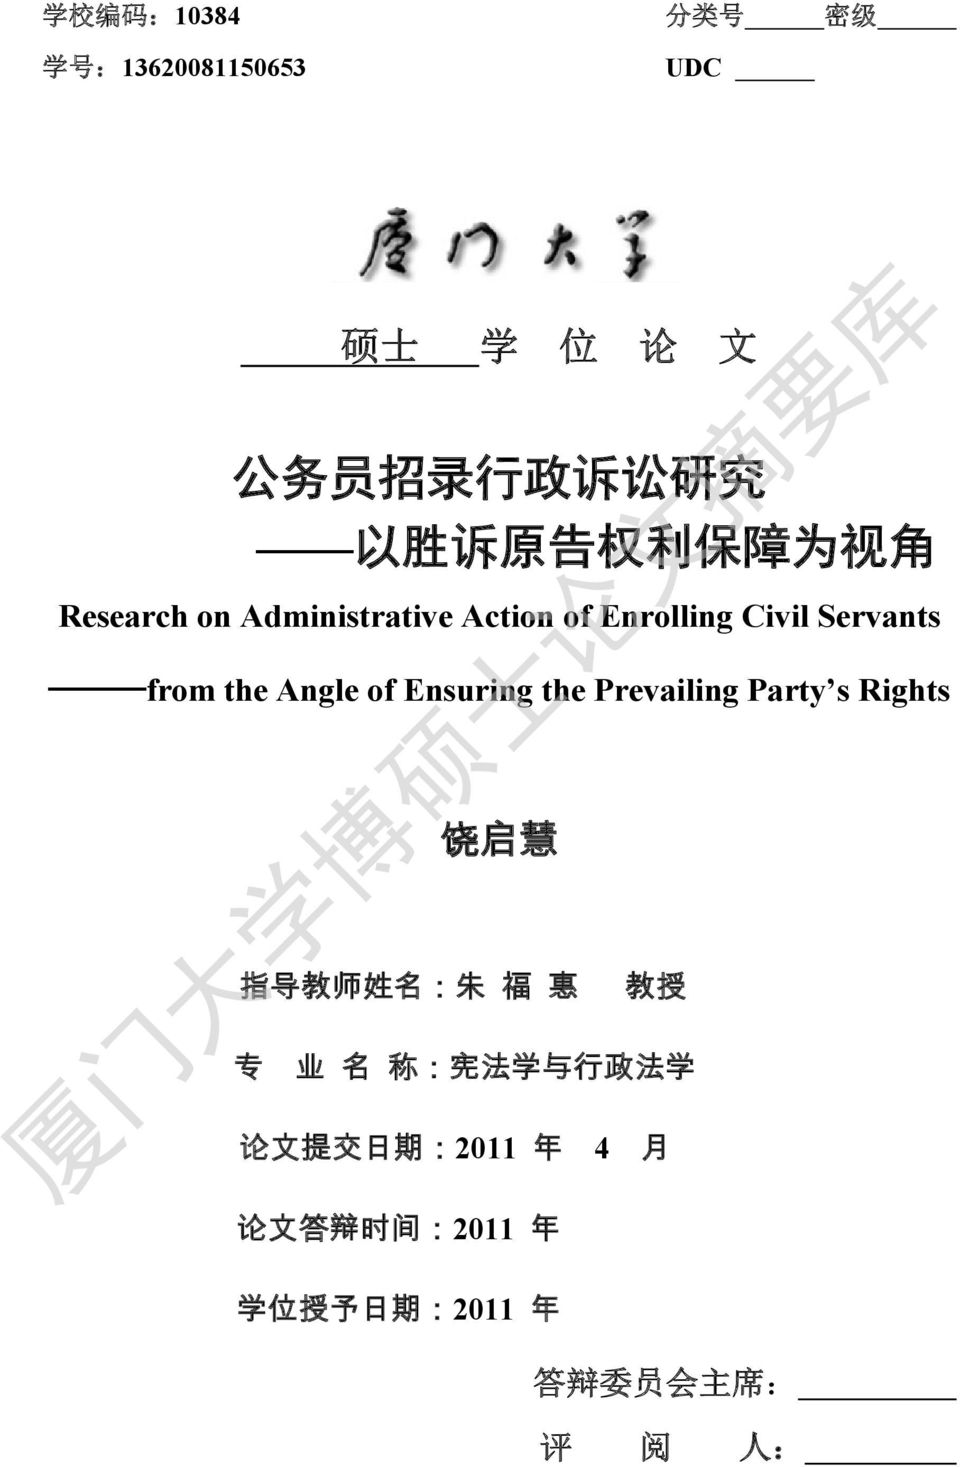 of Ensuring the Prevailing Party s Rights 饶 启 慧 指 导 教 师 姓 名 : 朱 福 惠 教 授 专 业 名 称 : 宪 法 学 与 行